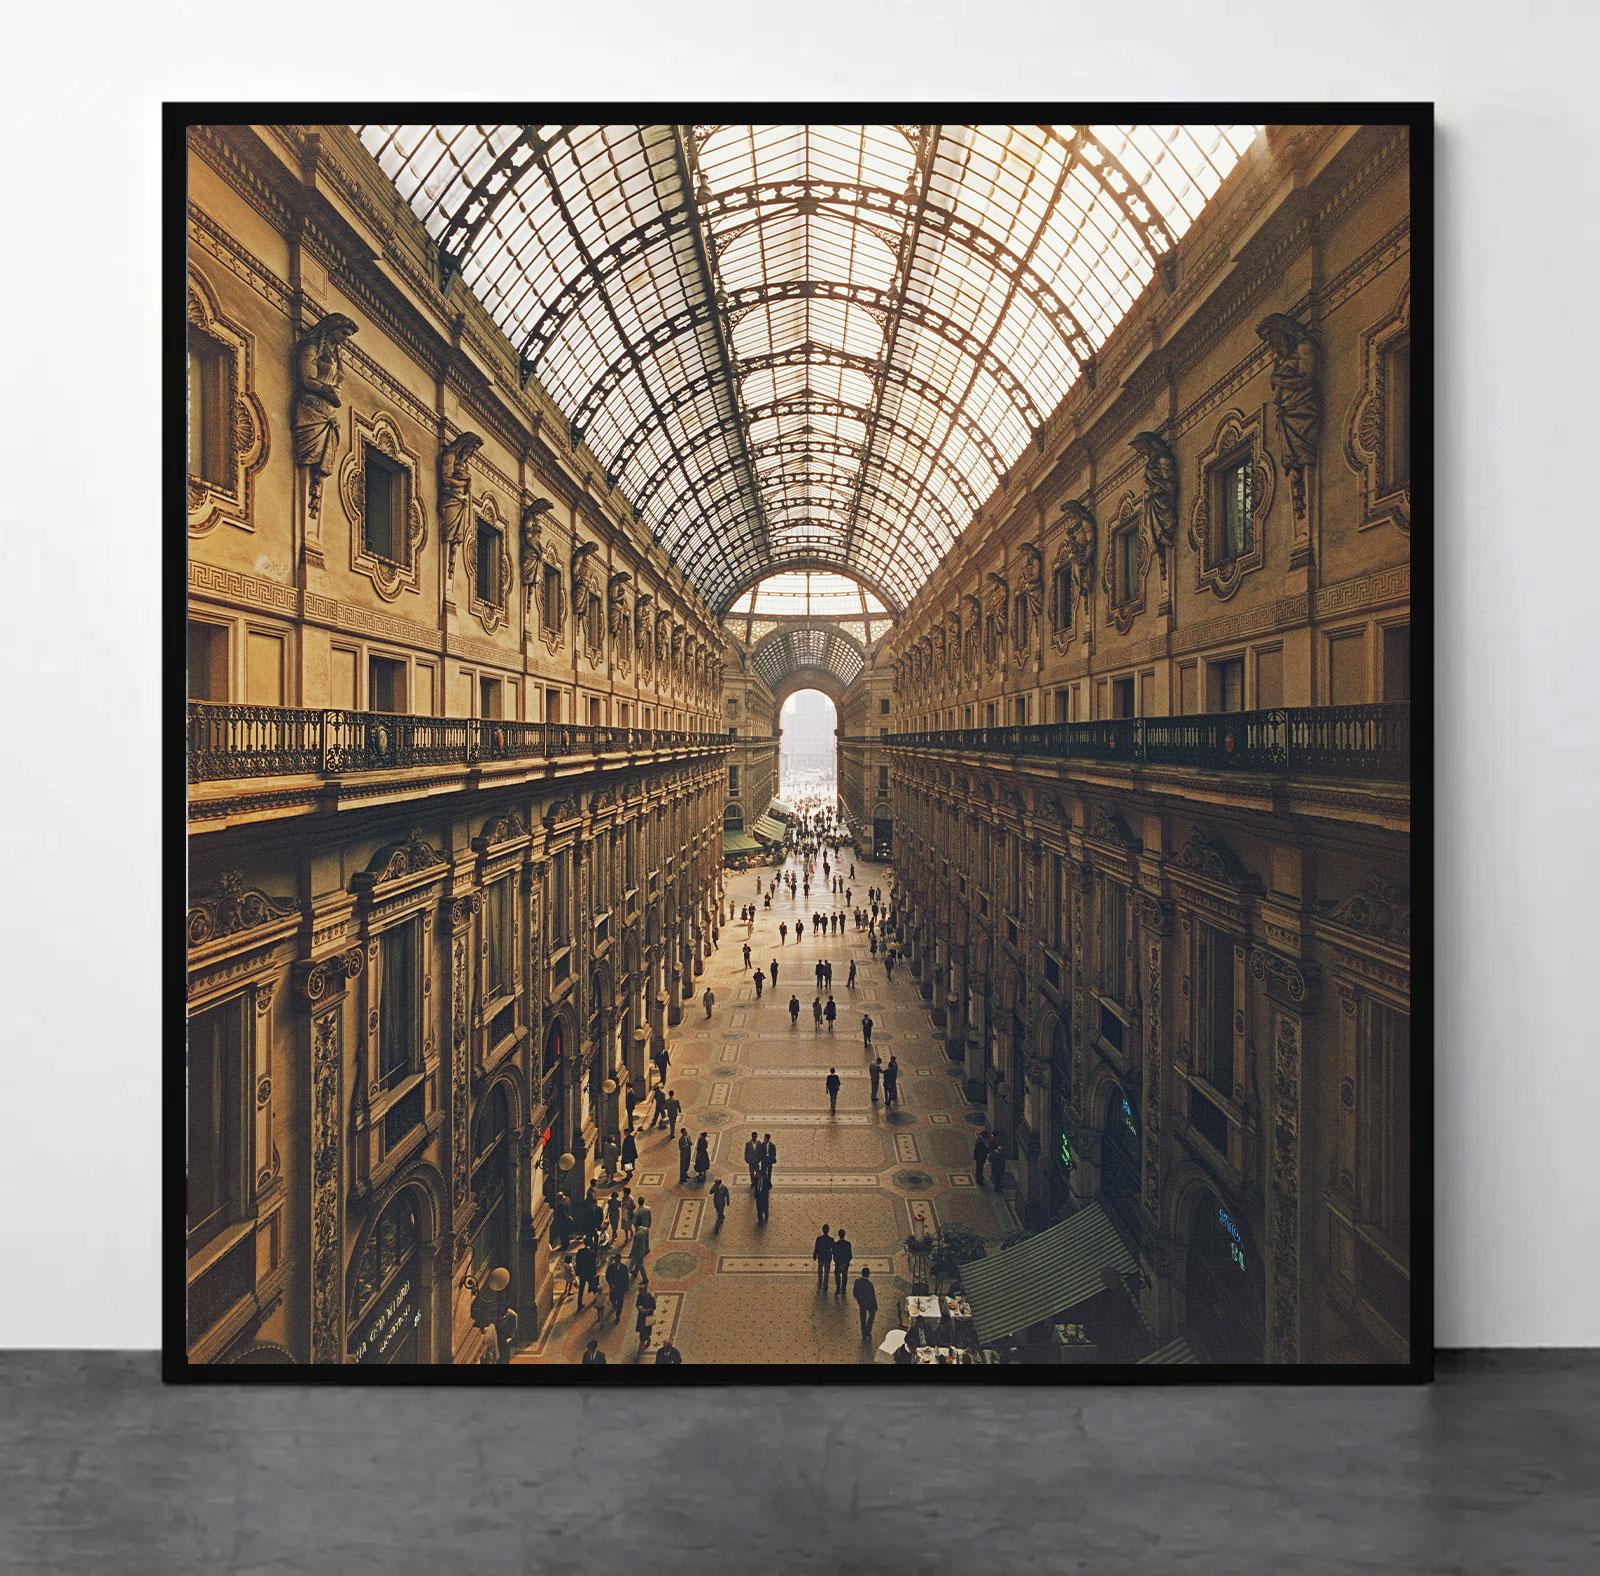 Slim Aarons
Galleria Vittorio Emanuele II
1960 (printed later)
C print
Estate stamped and numbered edition of 150 
with Certificate of authenticity
Caption: View looking down the Galleria Vittorio Emanuele II in Milan, Italy, 1960. Opened in 1890,